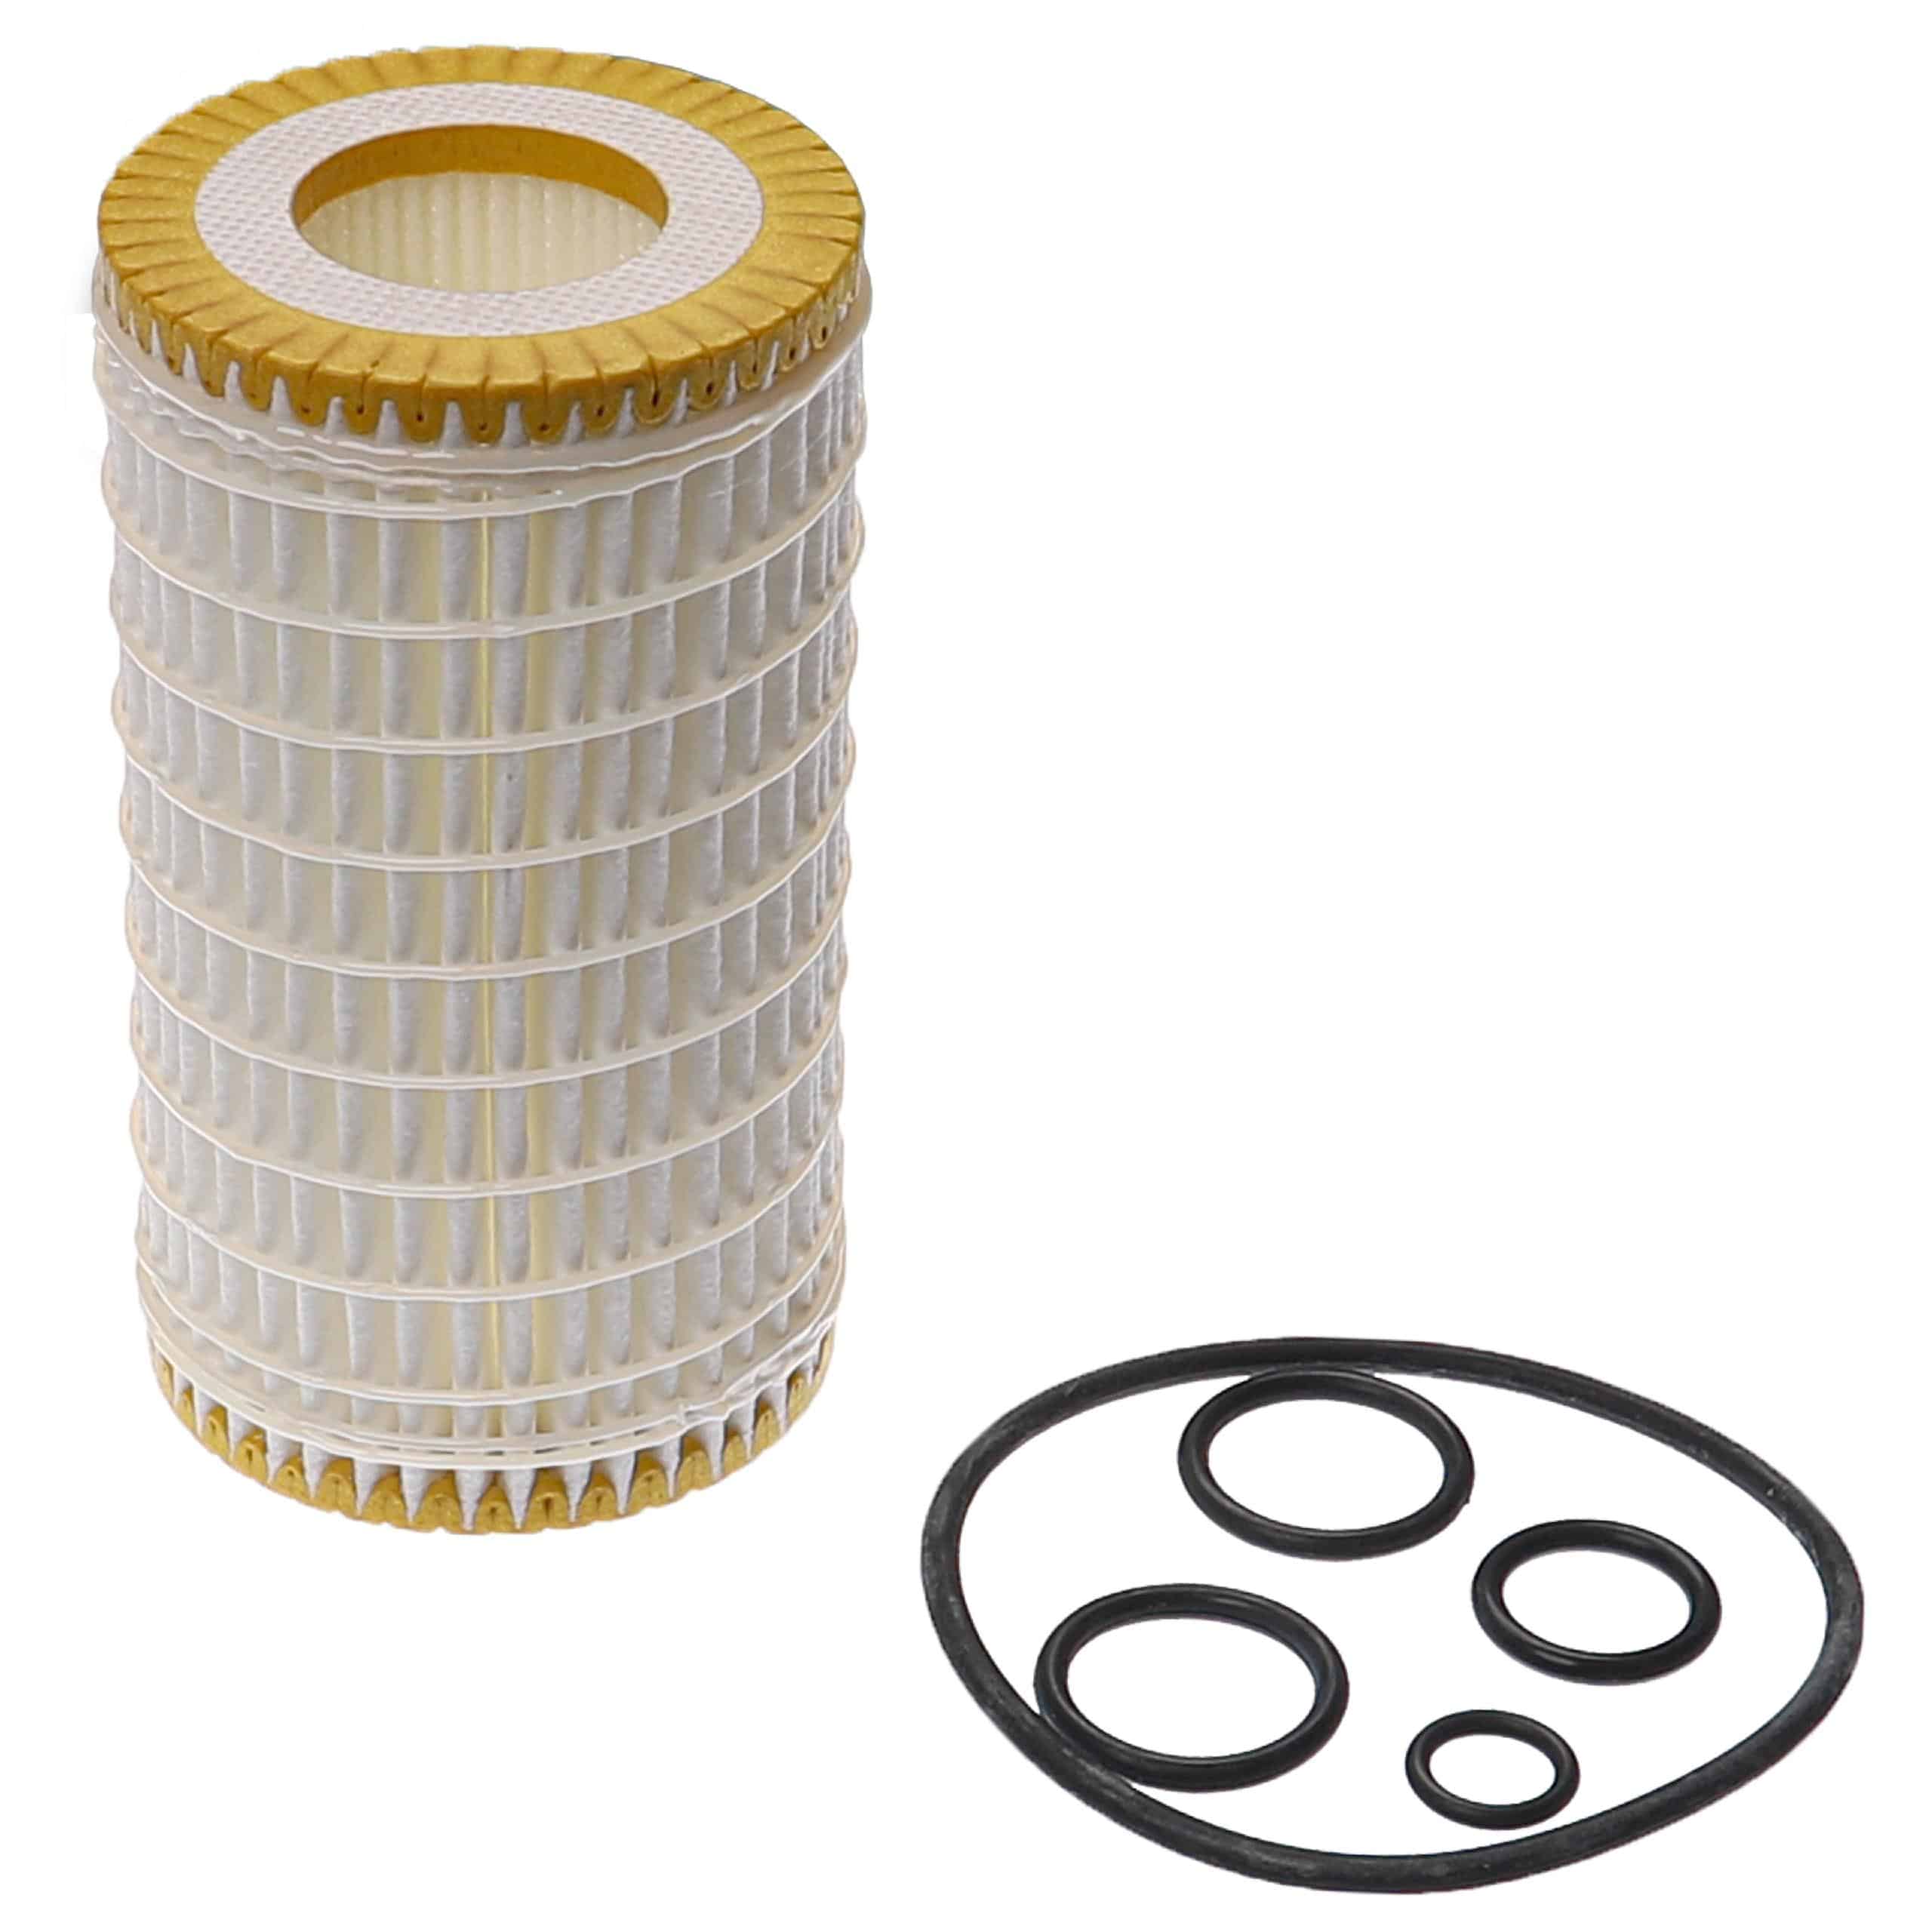 Vehicle Oil Filter as Replacement for ACDelco AC6203E - Spare Filter